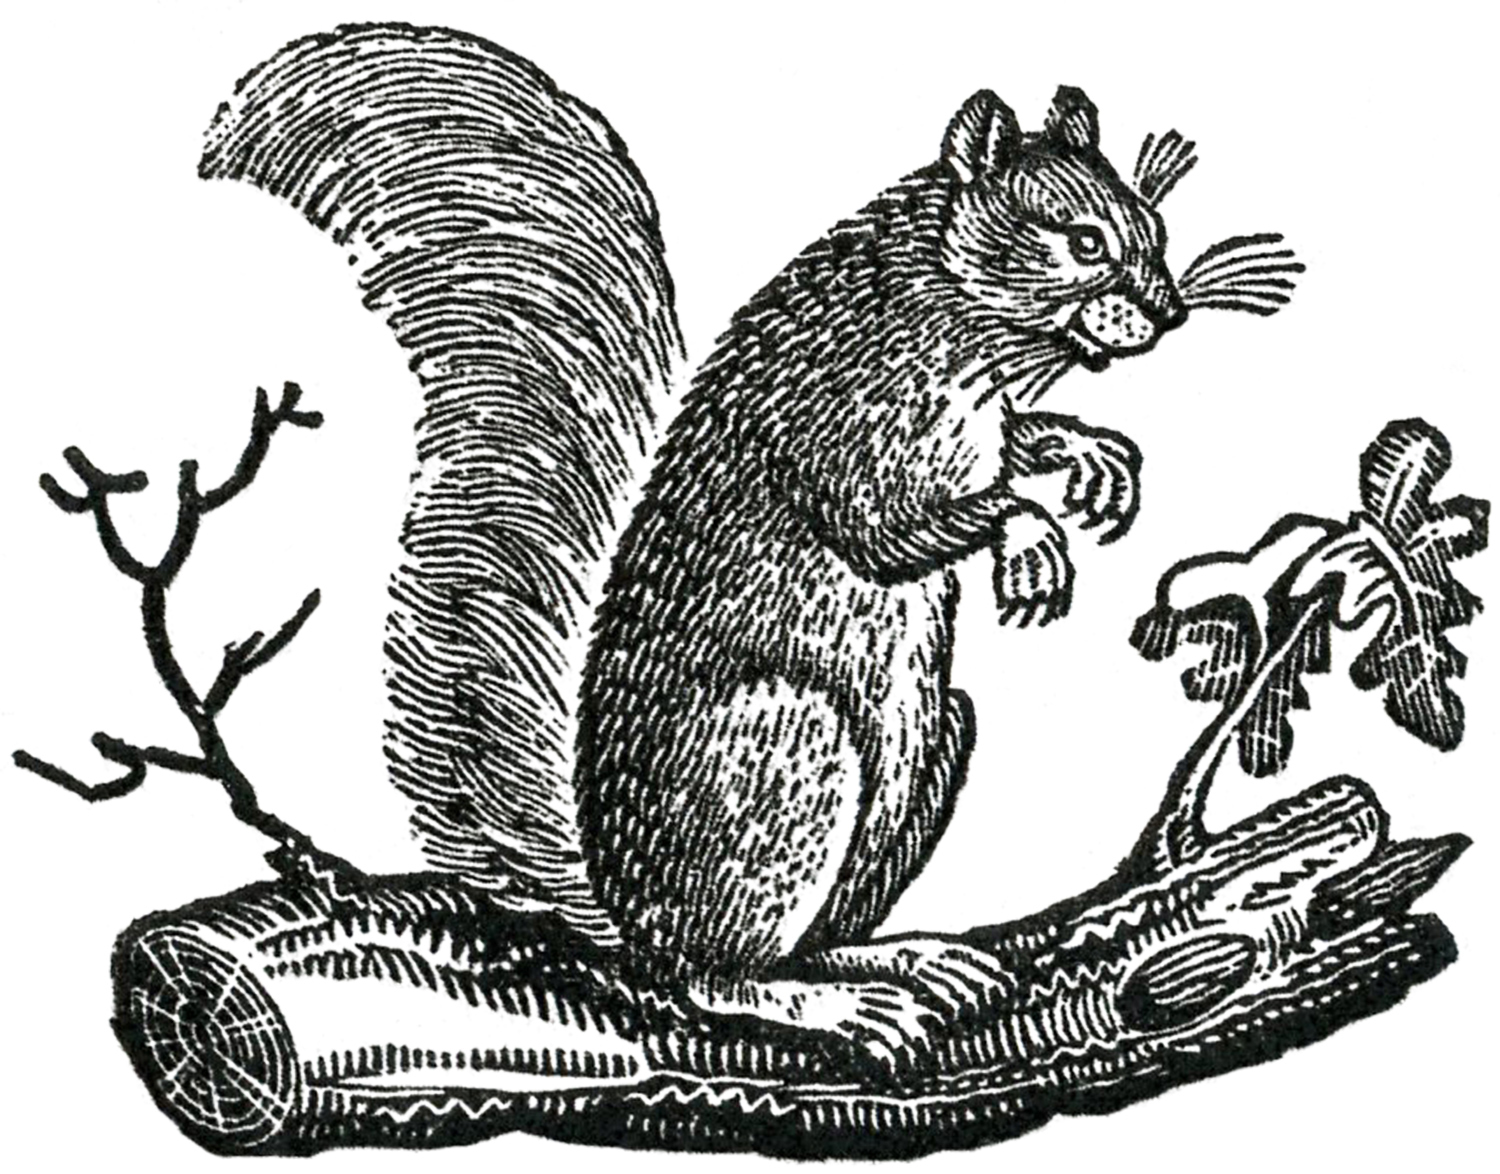 black and white squirrel clipart